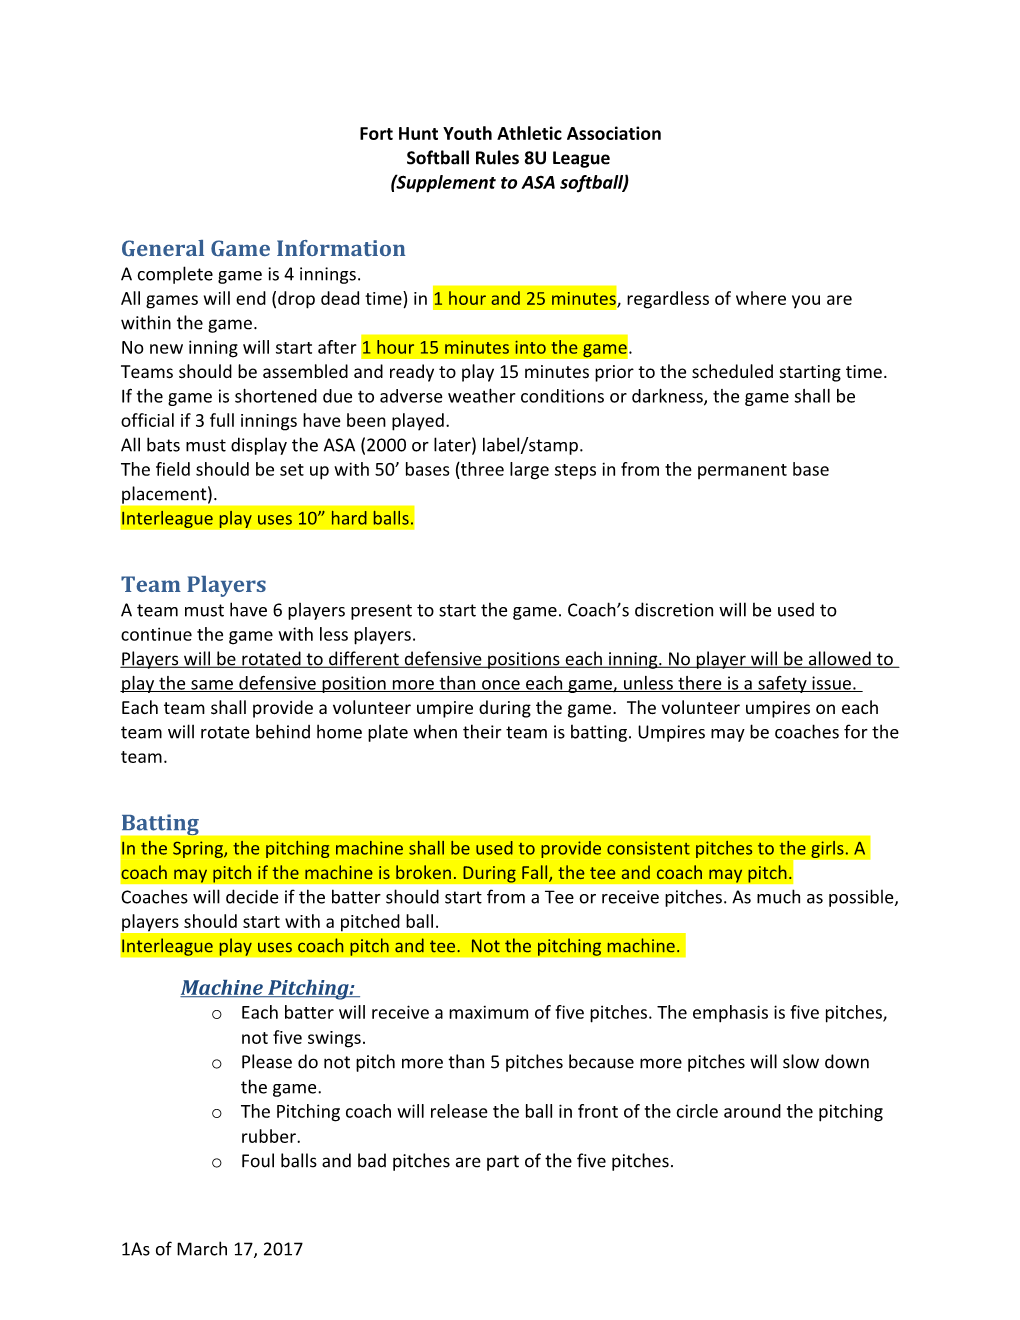 Fort Hunt Youth Athletic Association Softball Rules 8U League (Supplement to ASA Softball)